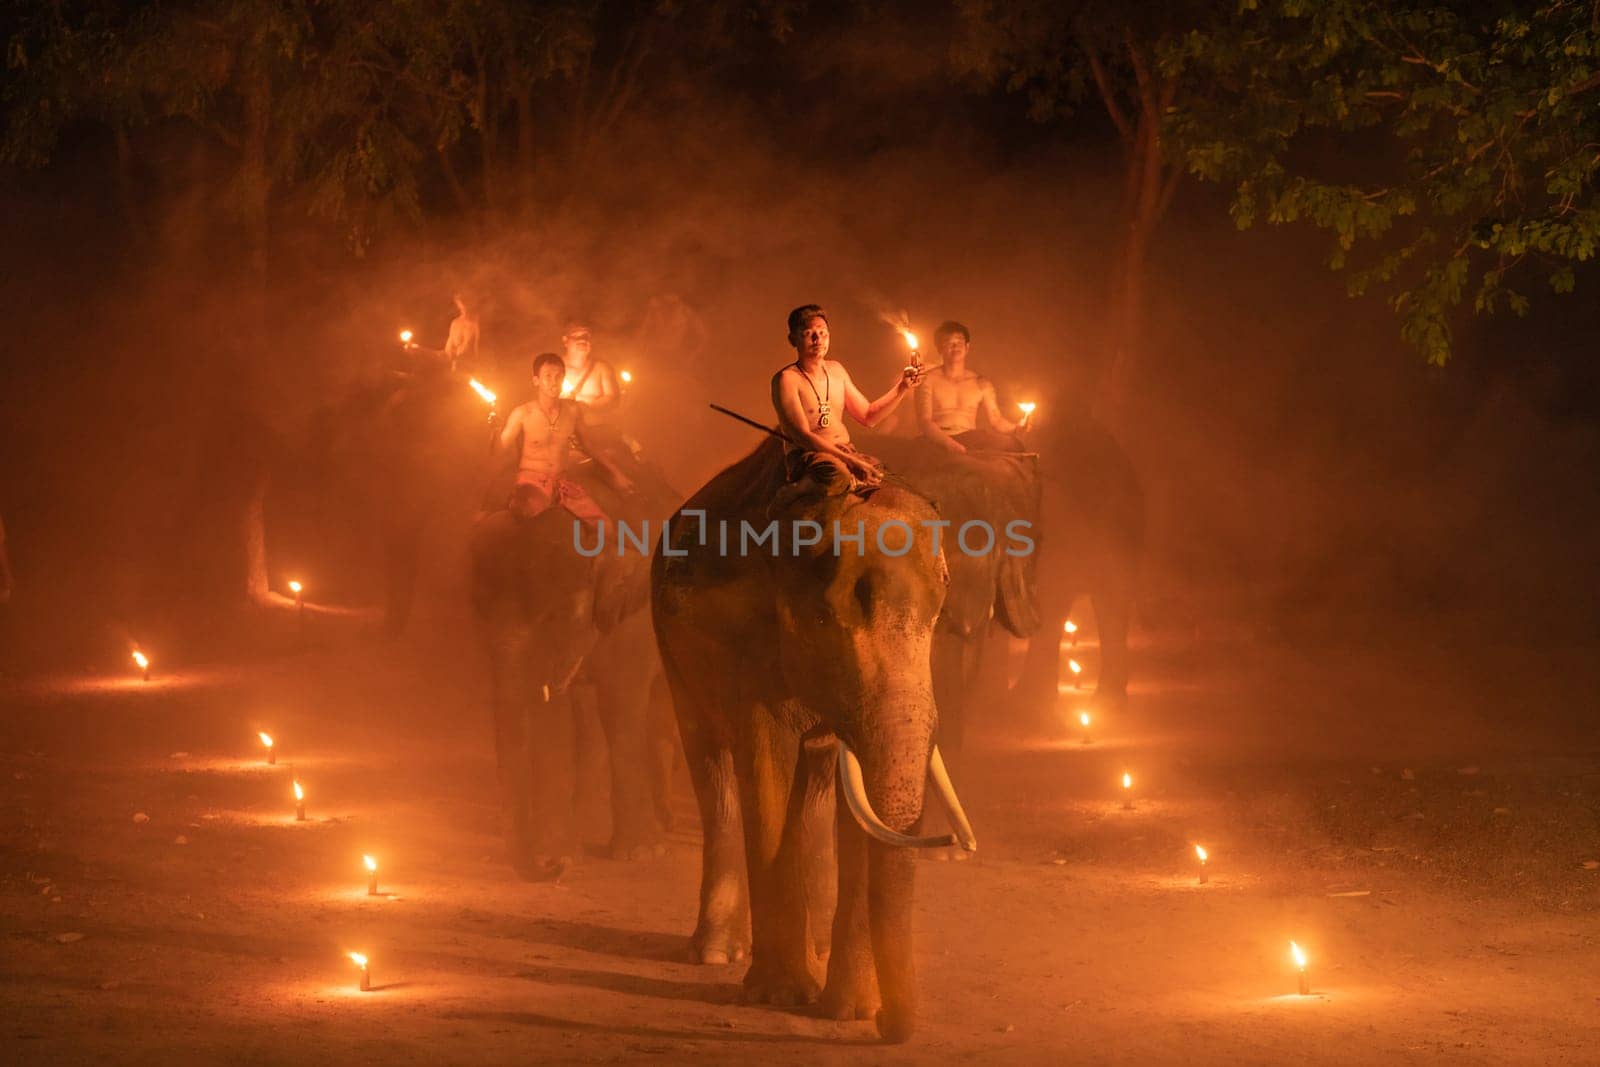 Group of mahout with elephants hold lamp and walk along the way with the row of fire lamp at night in concept of relationship between wildlife animal and people.